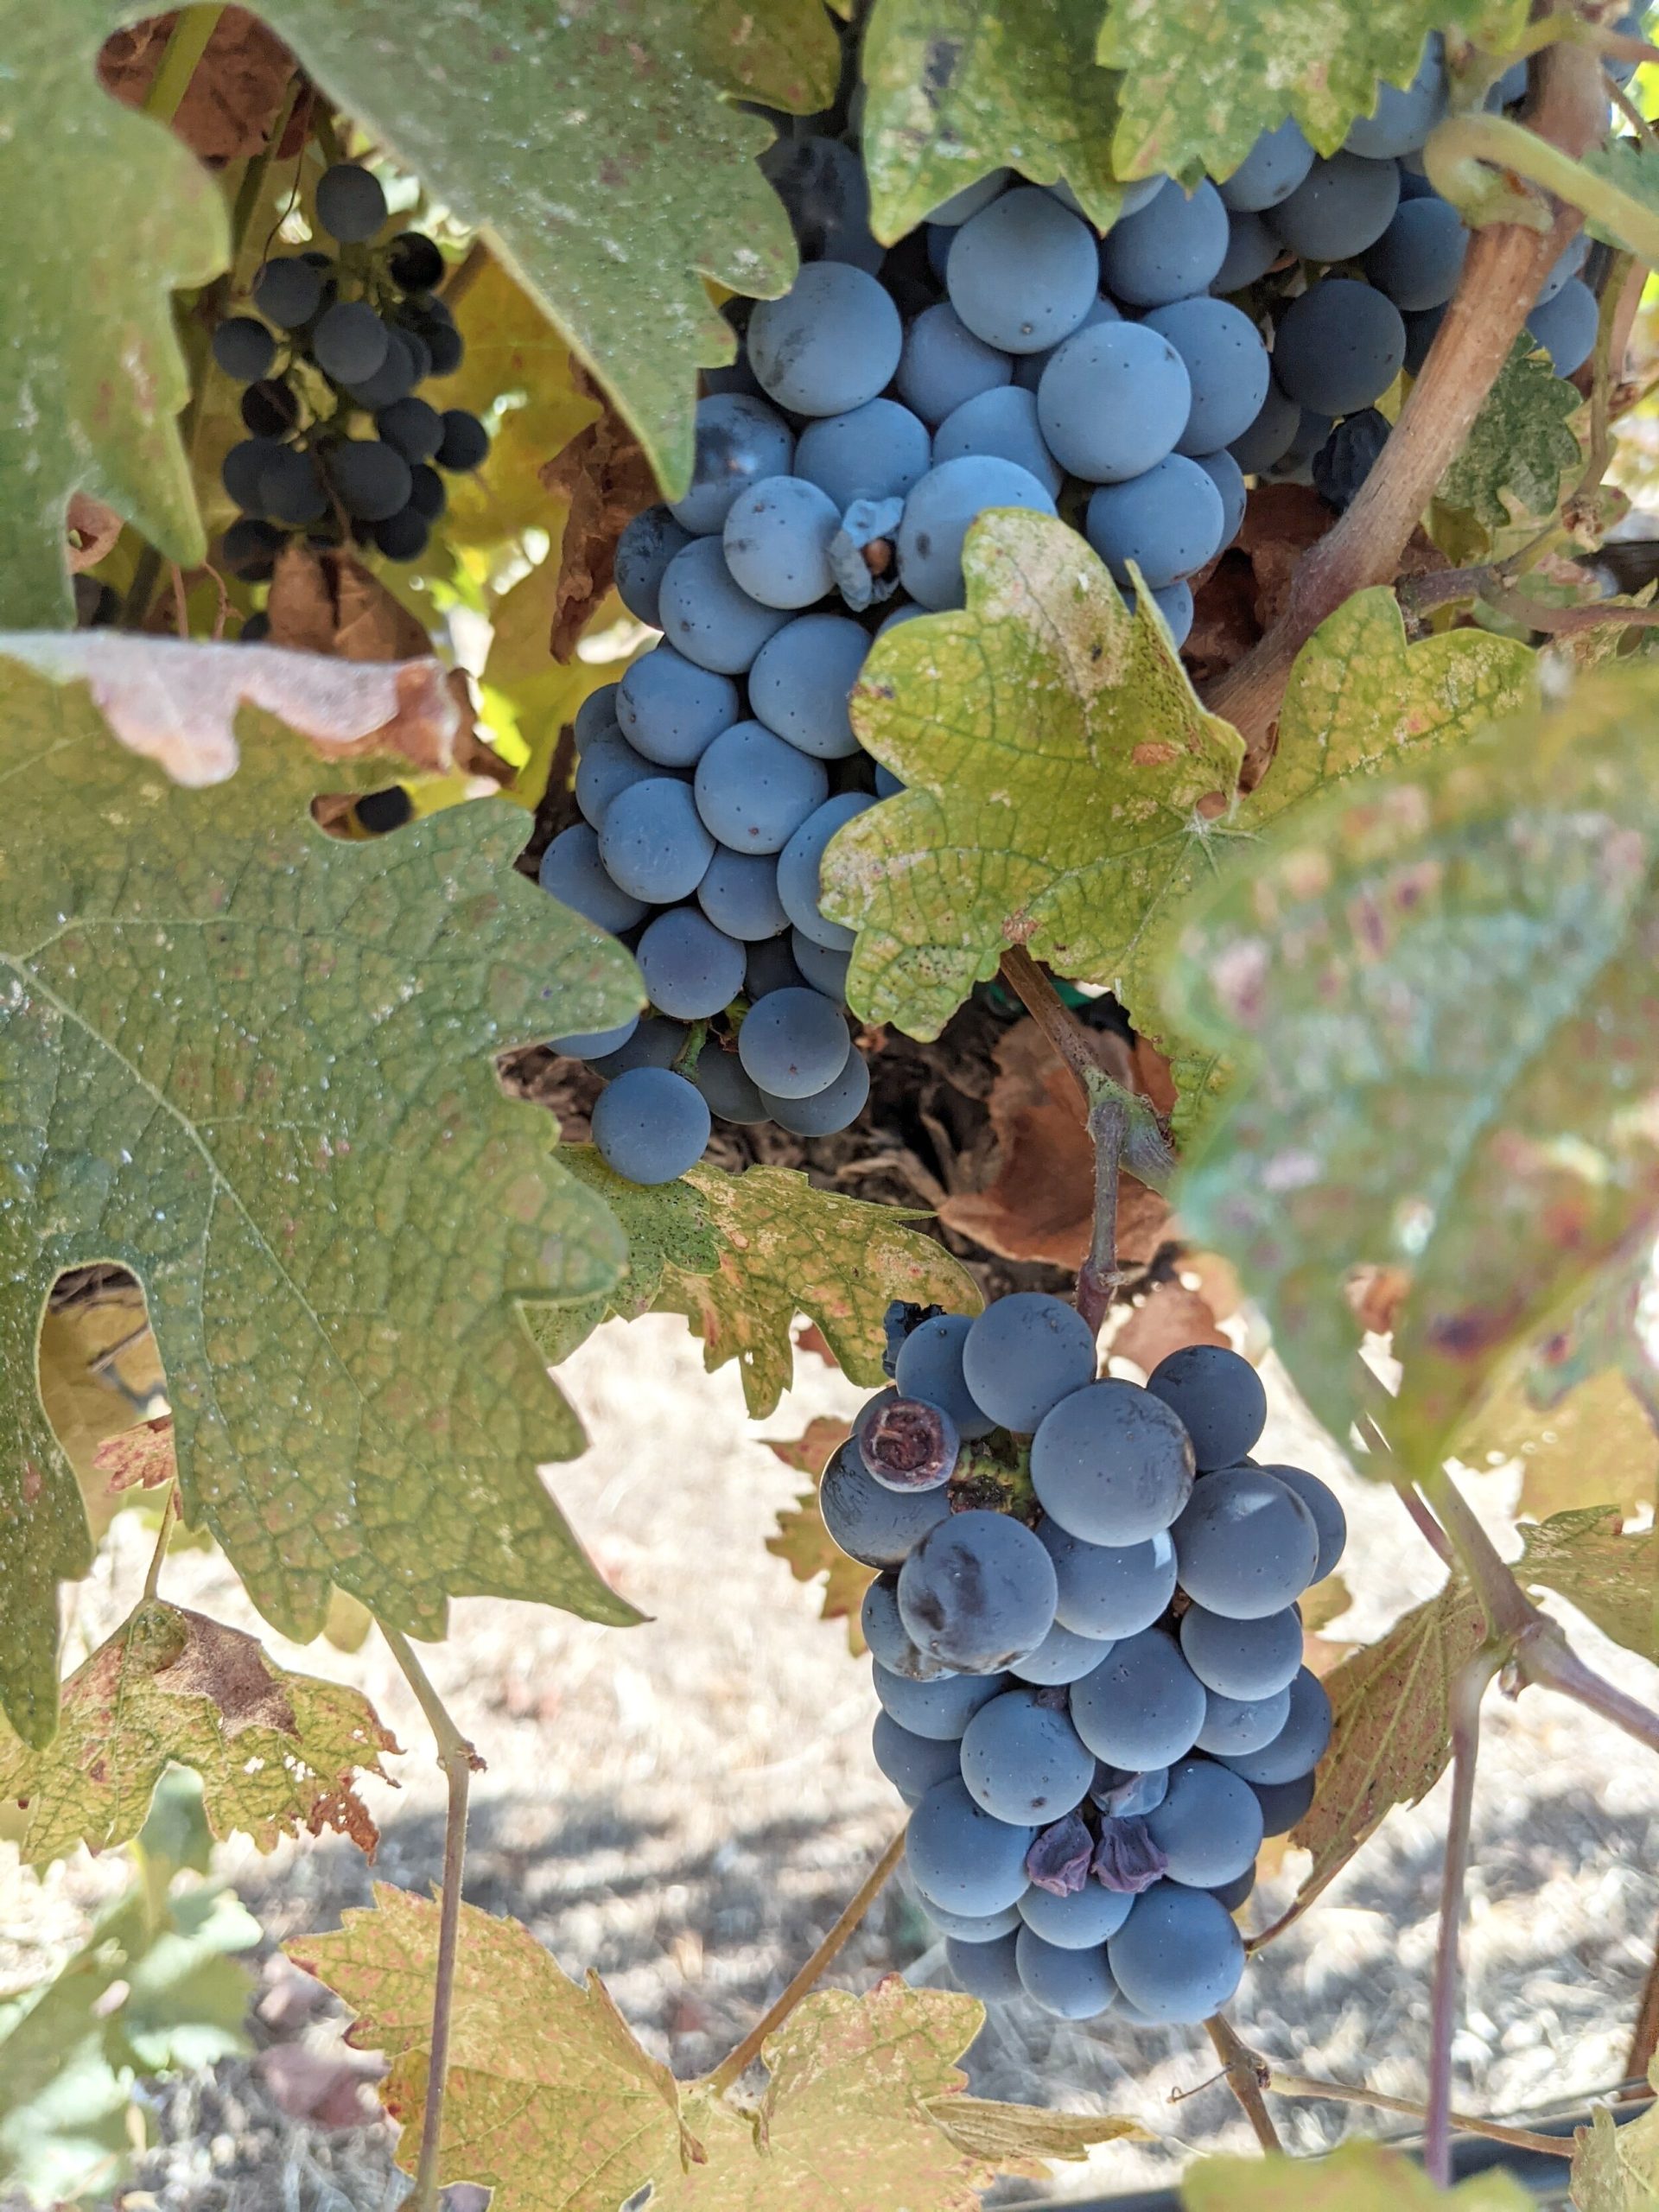 merlot grapes - what's a good price for merlot wine